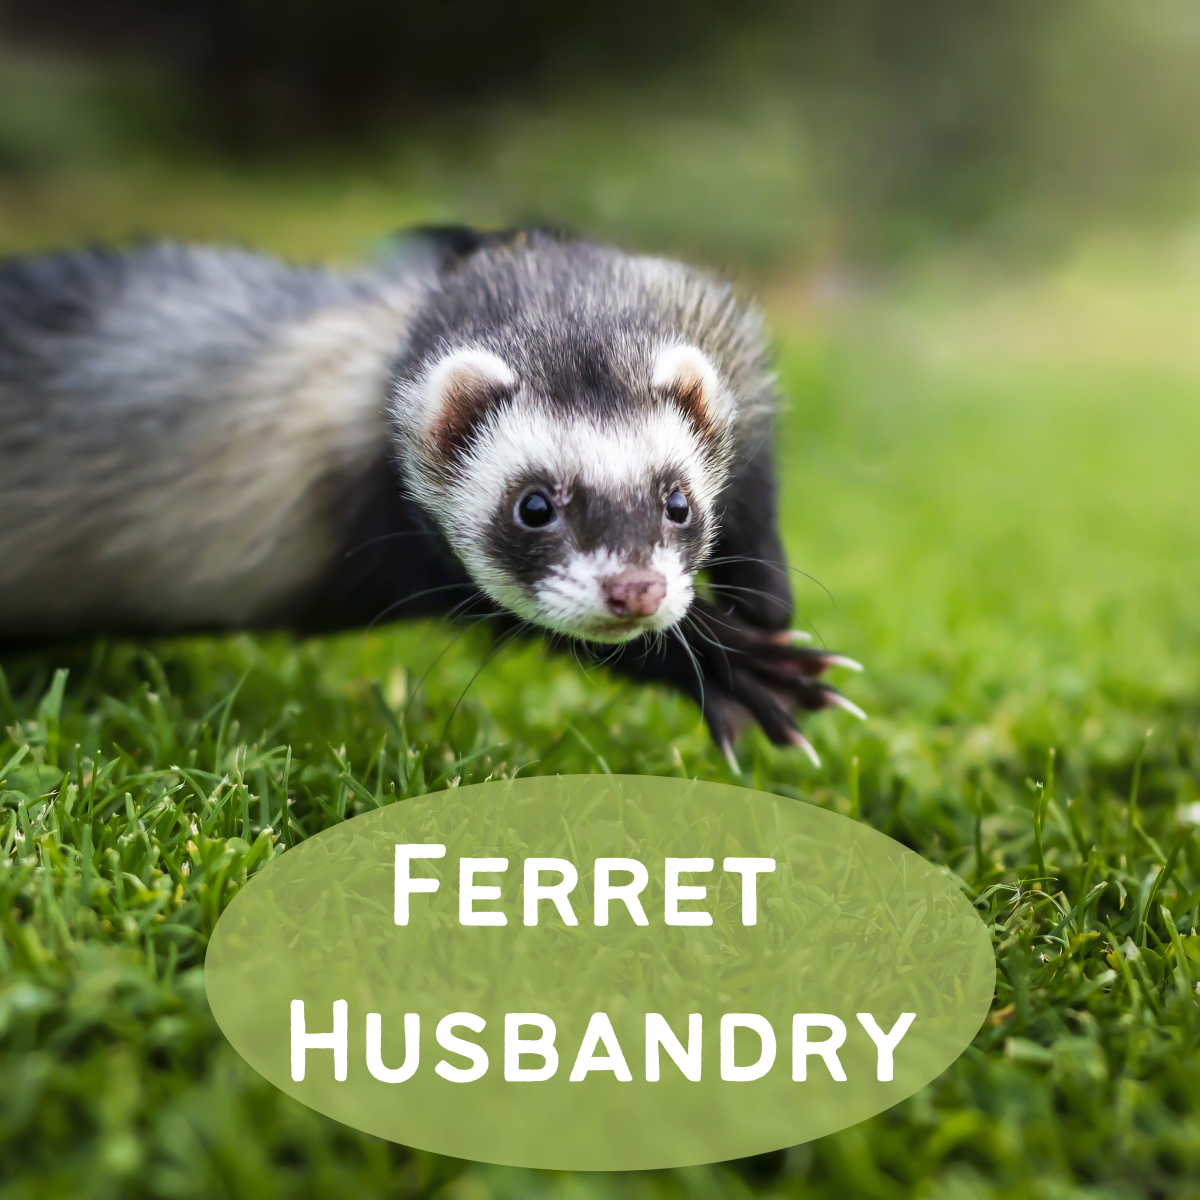 A guide to caring for ferrets.